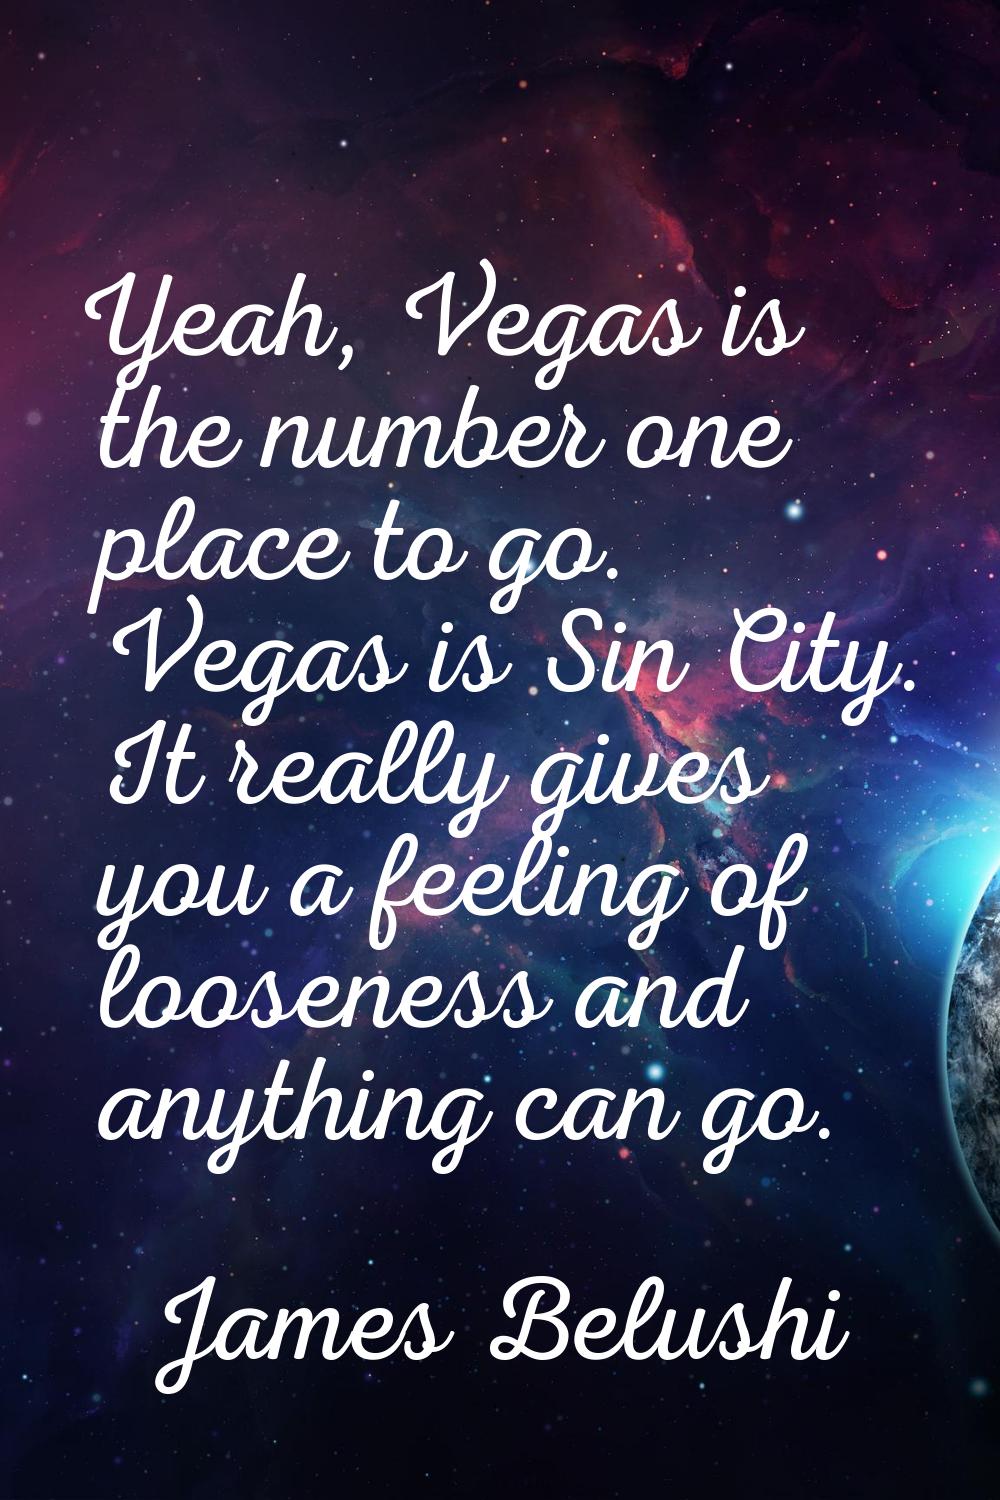 Yeah, Vegas is the number one place to go. Vegas is Sin City. It really gives you a feeling of loos